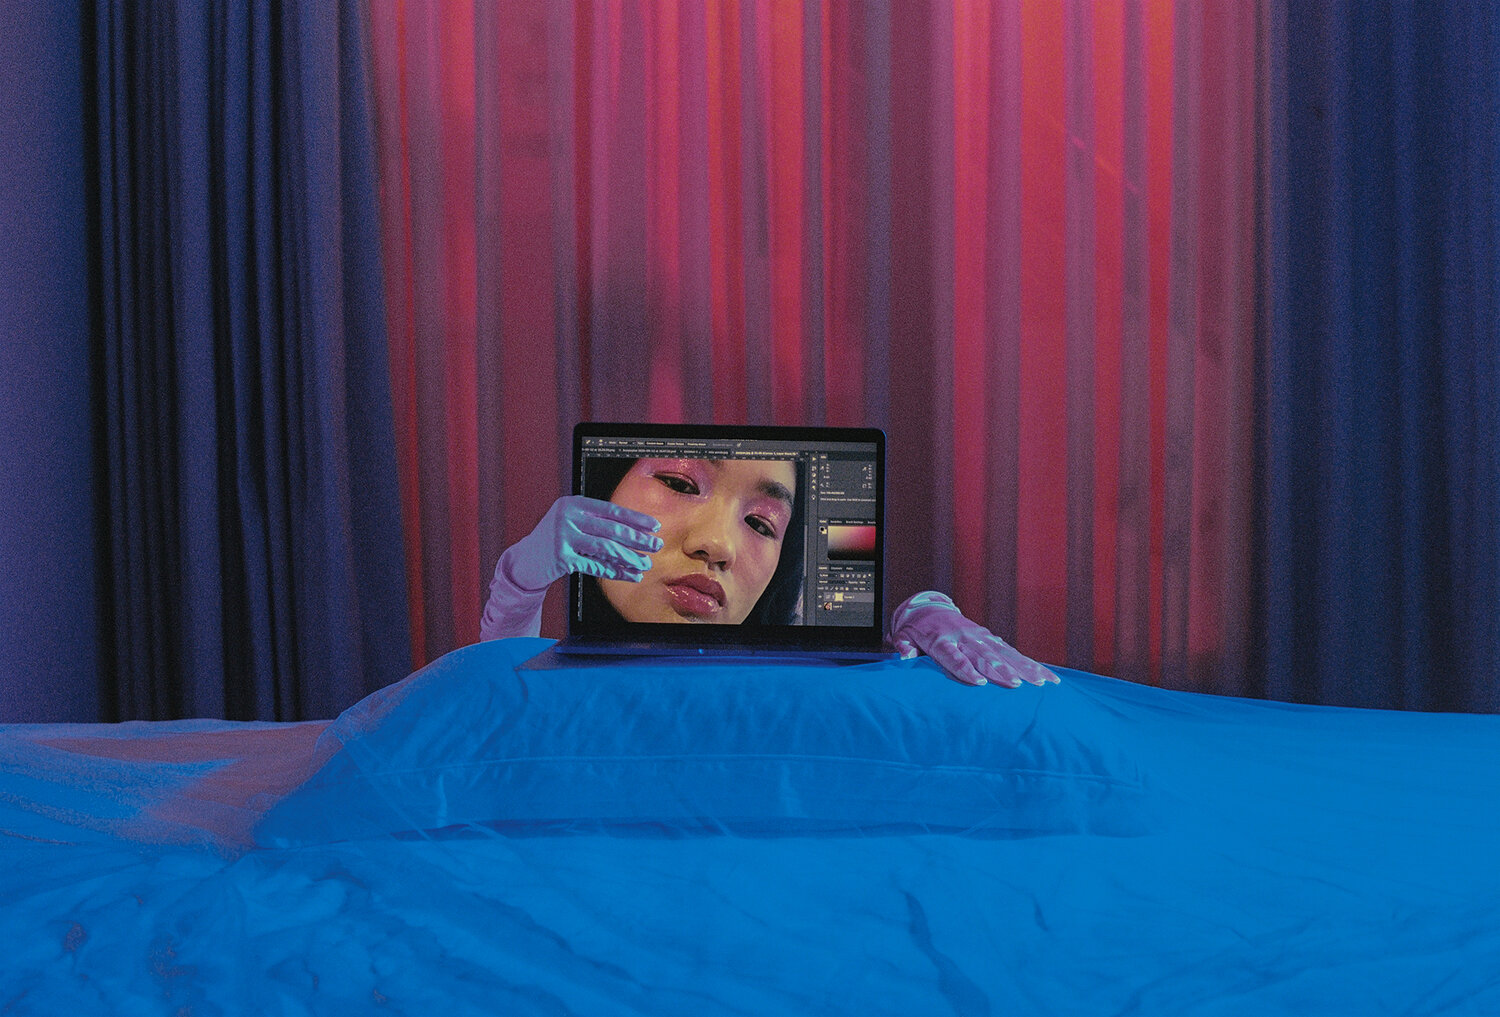 Laptop screen opened to a zoomed-in image of a sultry face with black hair, pink eyeshadow and lip gloss. The laptop is in a neon blue and pink bedroom, its screen held by hands in white satin gloves.